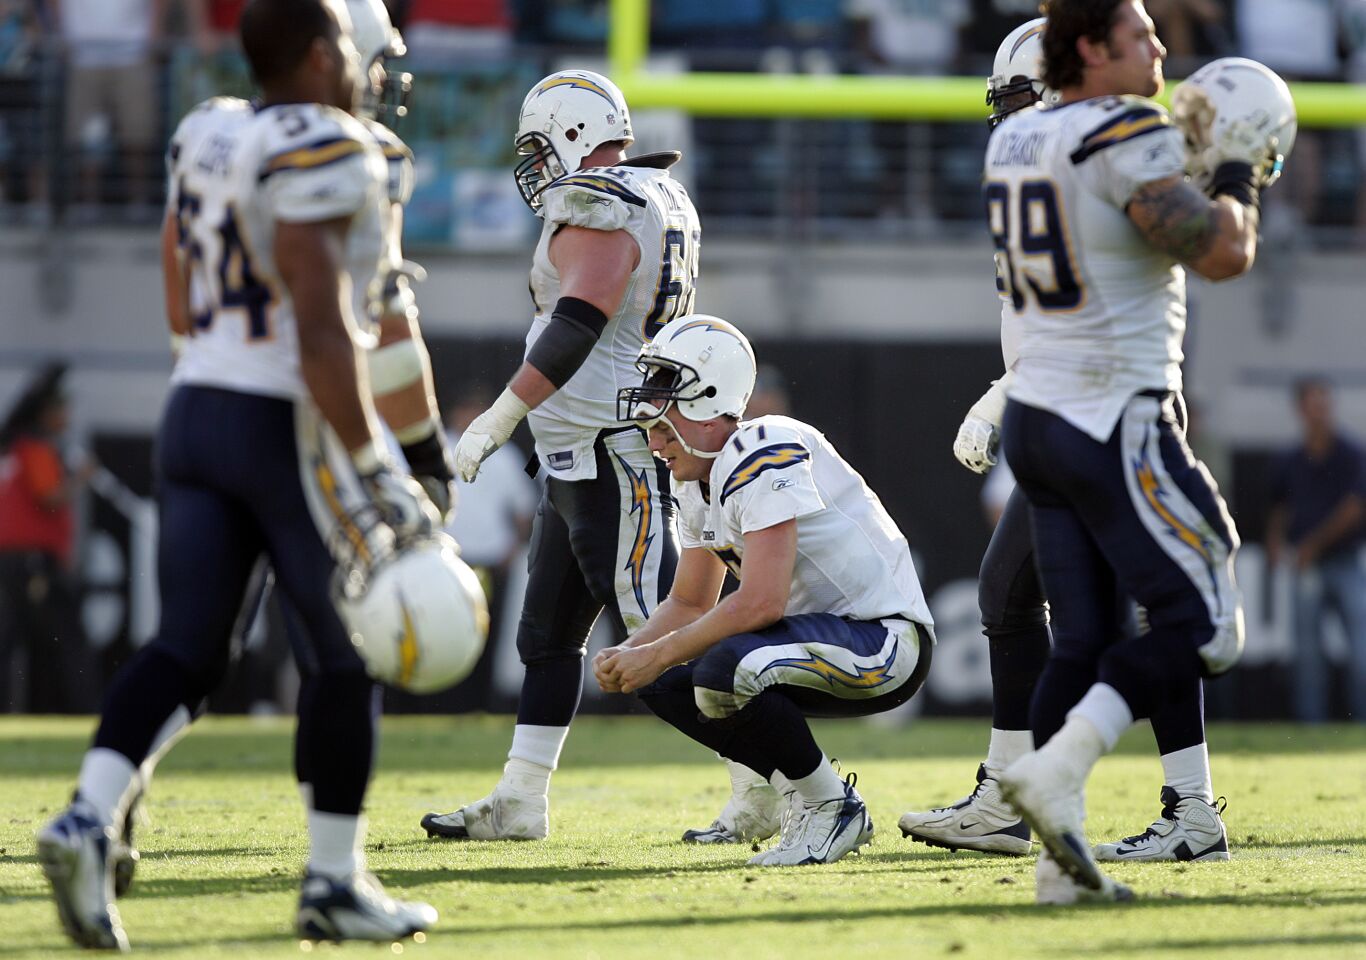 San Diego Chargers Philip Rivers reacts to his 4th quarter interception to Jaguars Sammy Knight for a touchdown in Jacksonville on November 18, 2007.